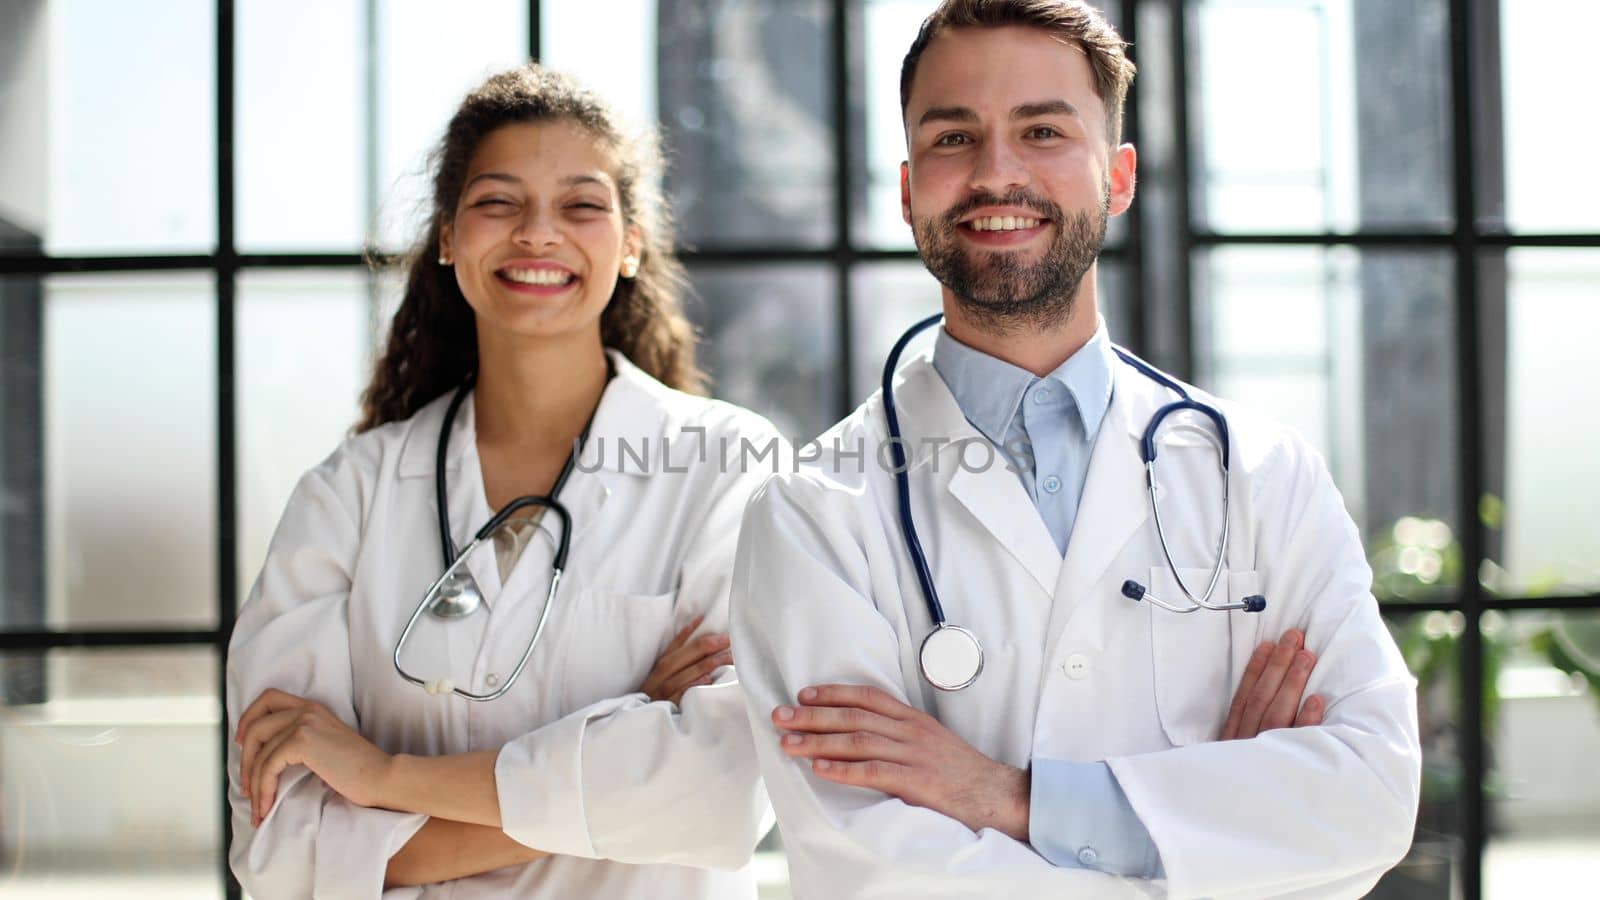 female doctor and male doctor stand in the lobby of the hospital